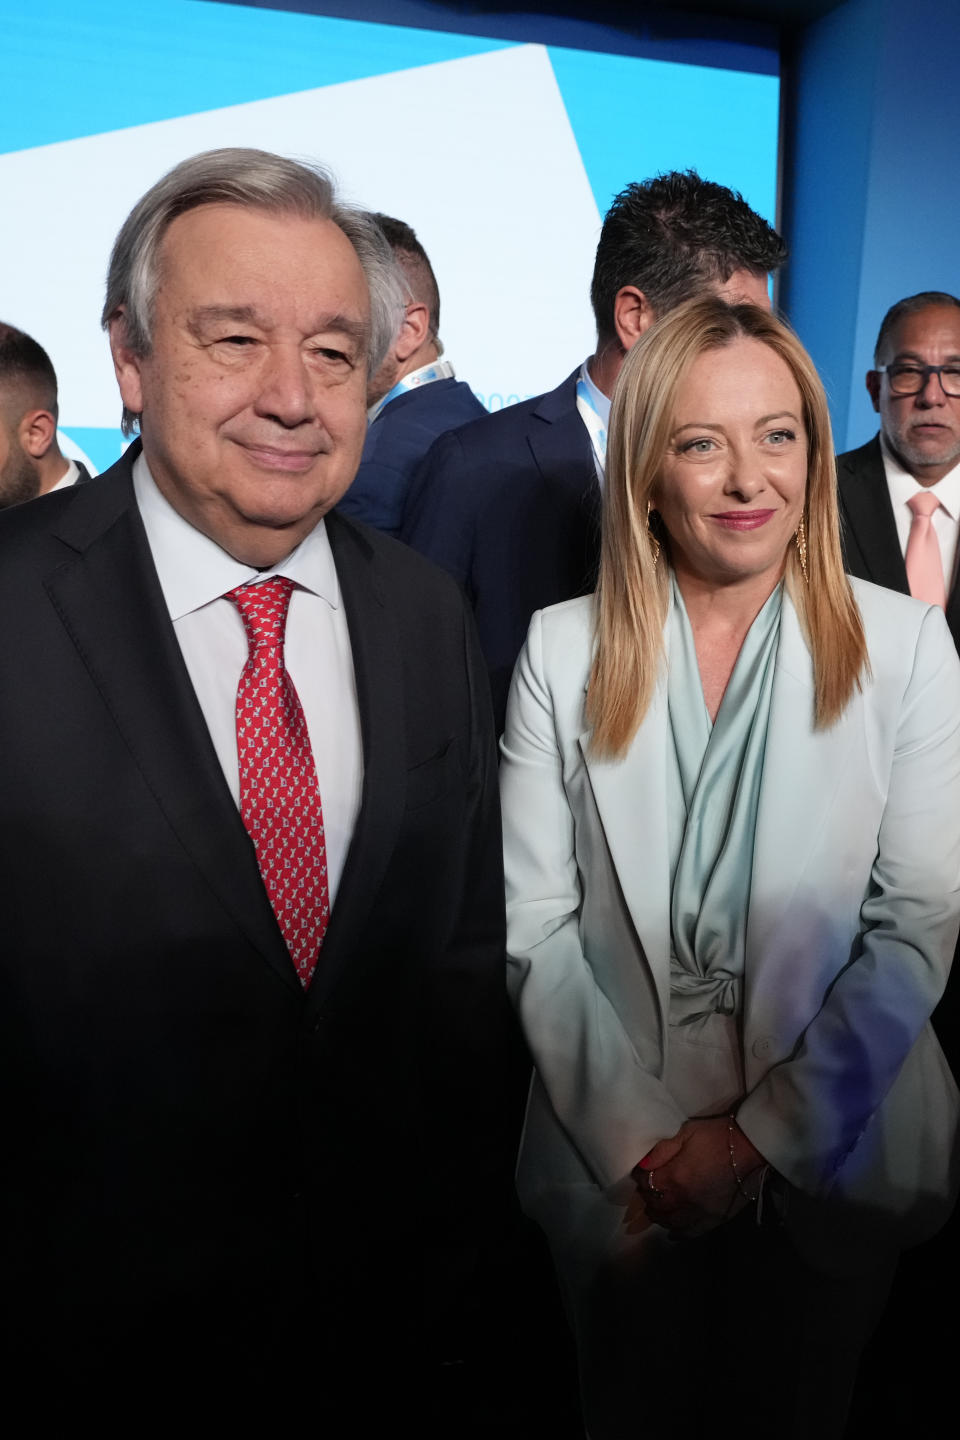 UN Secretary General Antonio Guterres, left, and Italian Premier Giorgia Meloni arrive for the opening session of a three-day U.N. Food and Agriculture Agency's summit on food systems in Rome, Monday, July 24, 2023. (AP Photo/Andrew Medichini)